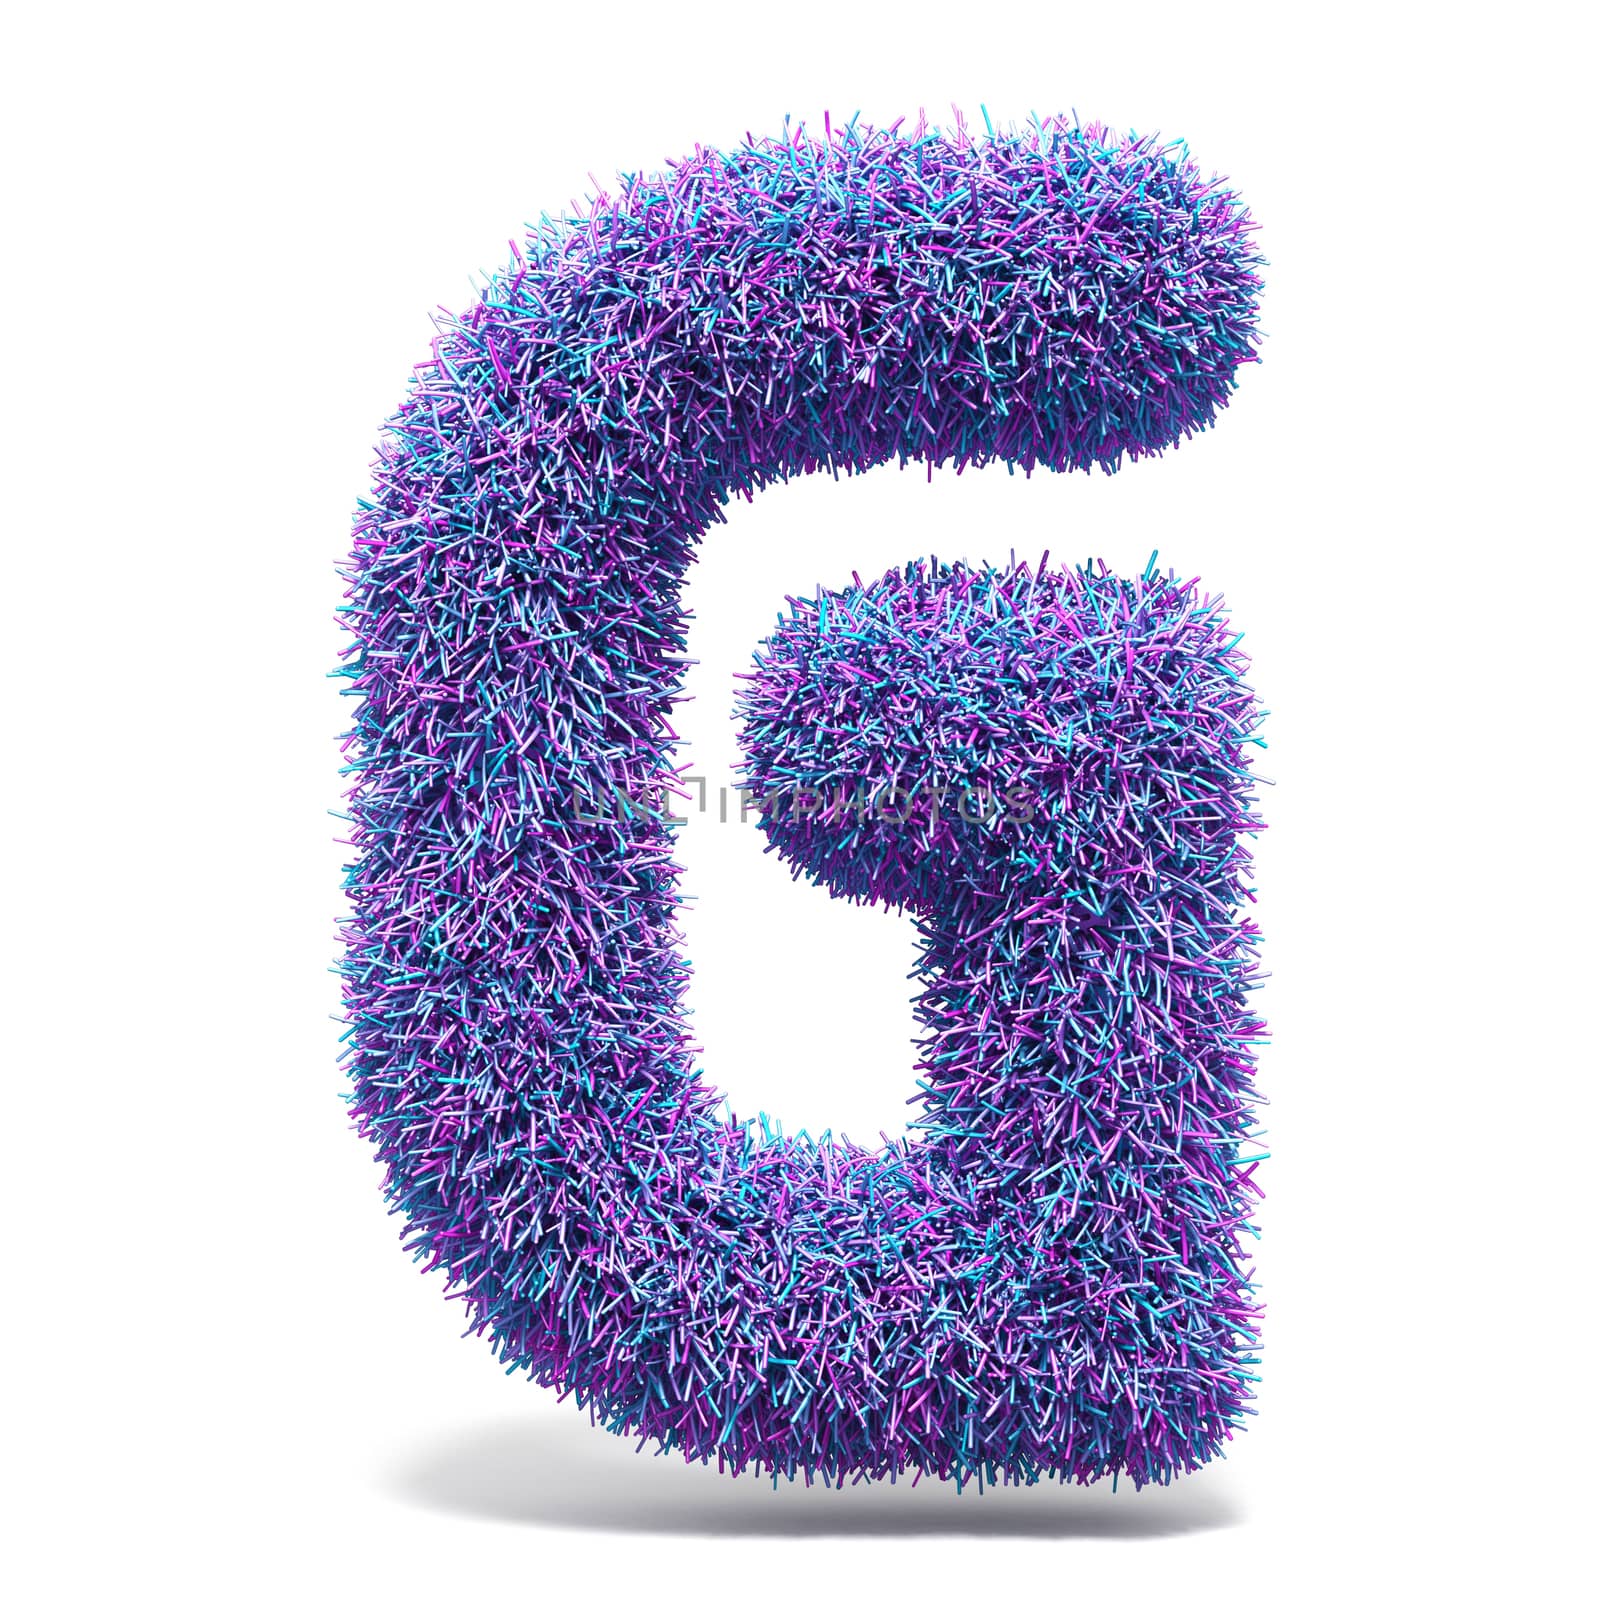 Purple faux fur LETTER G 3D render illustration isolated on white background